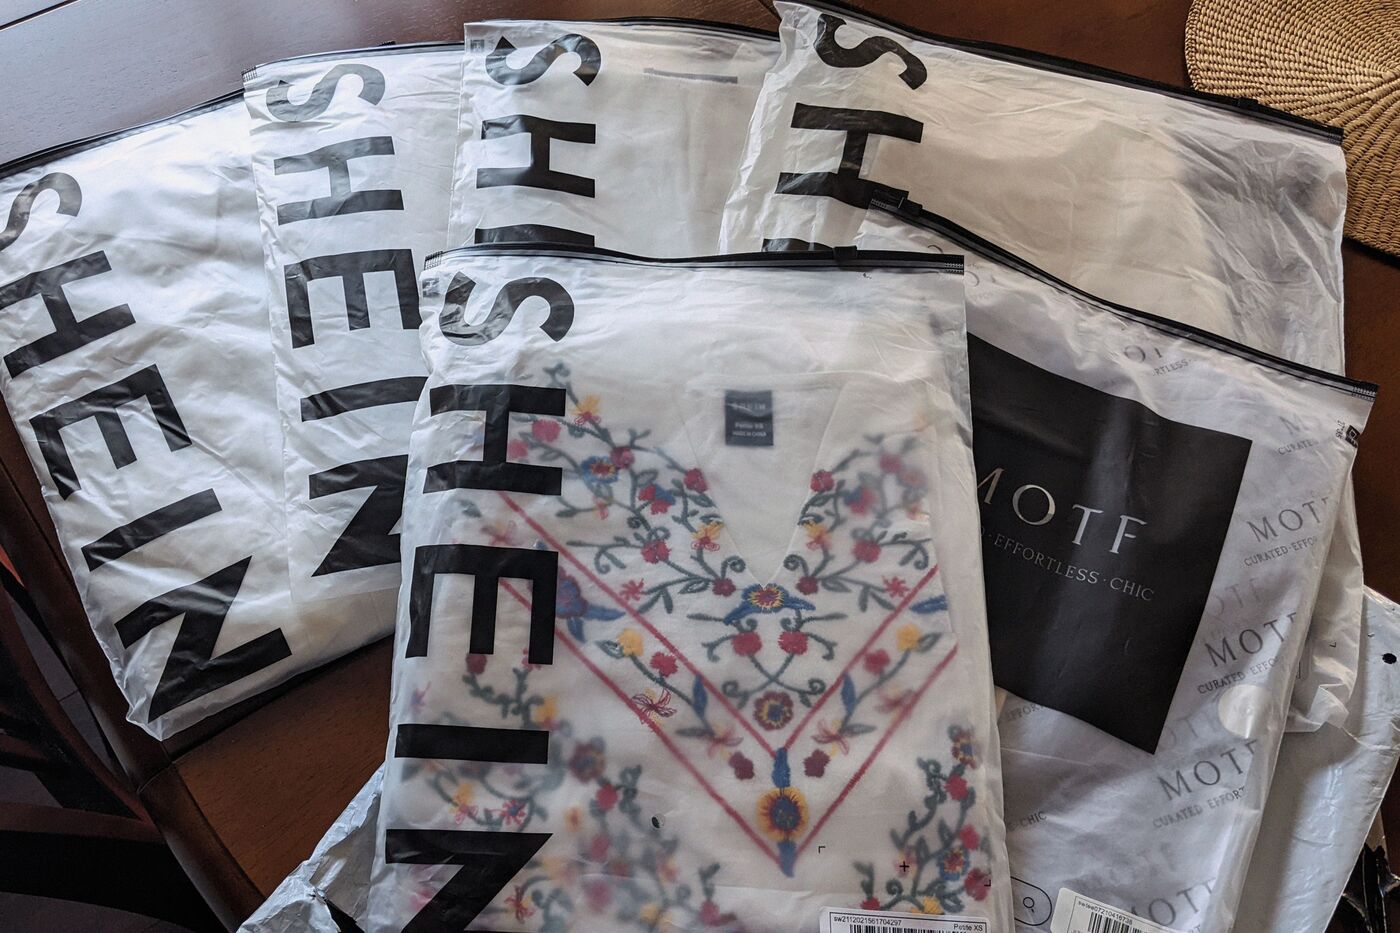 relates to Shein’s Cotton Tied to Chinese Region Accused of Forced Labor